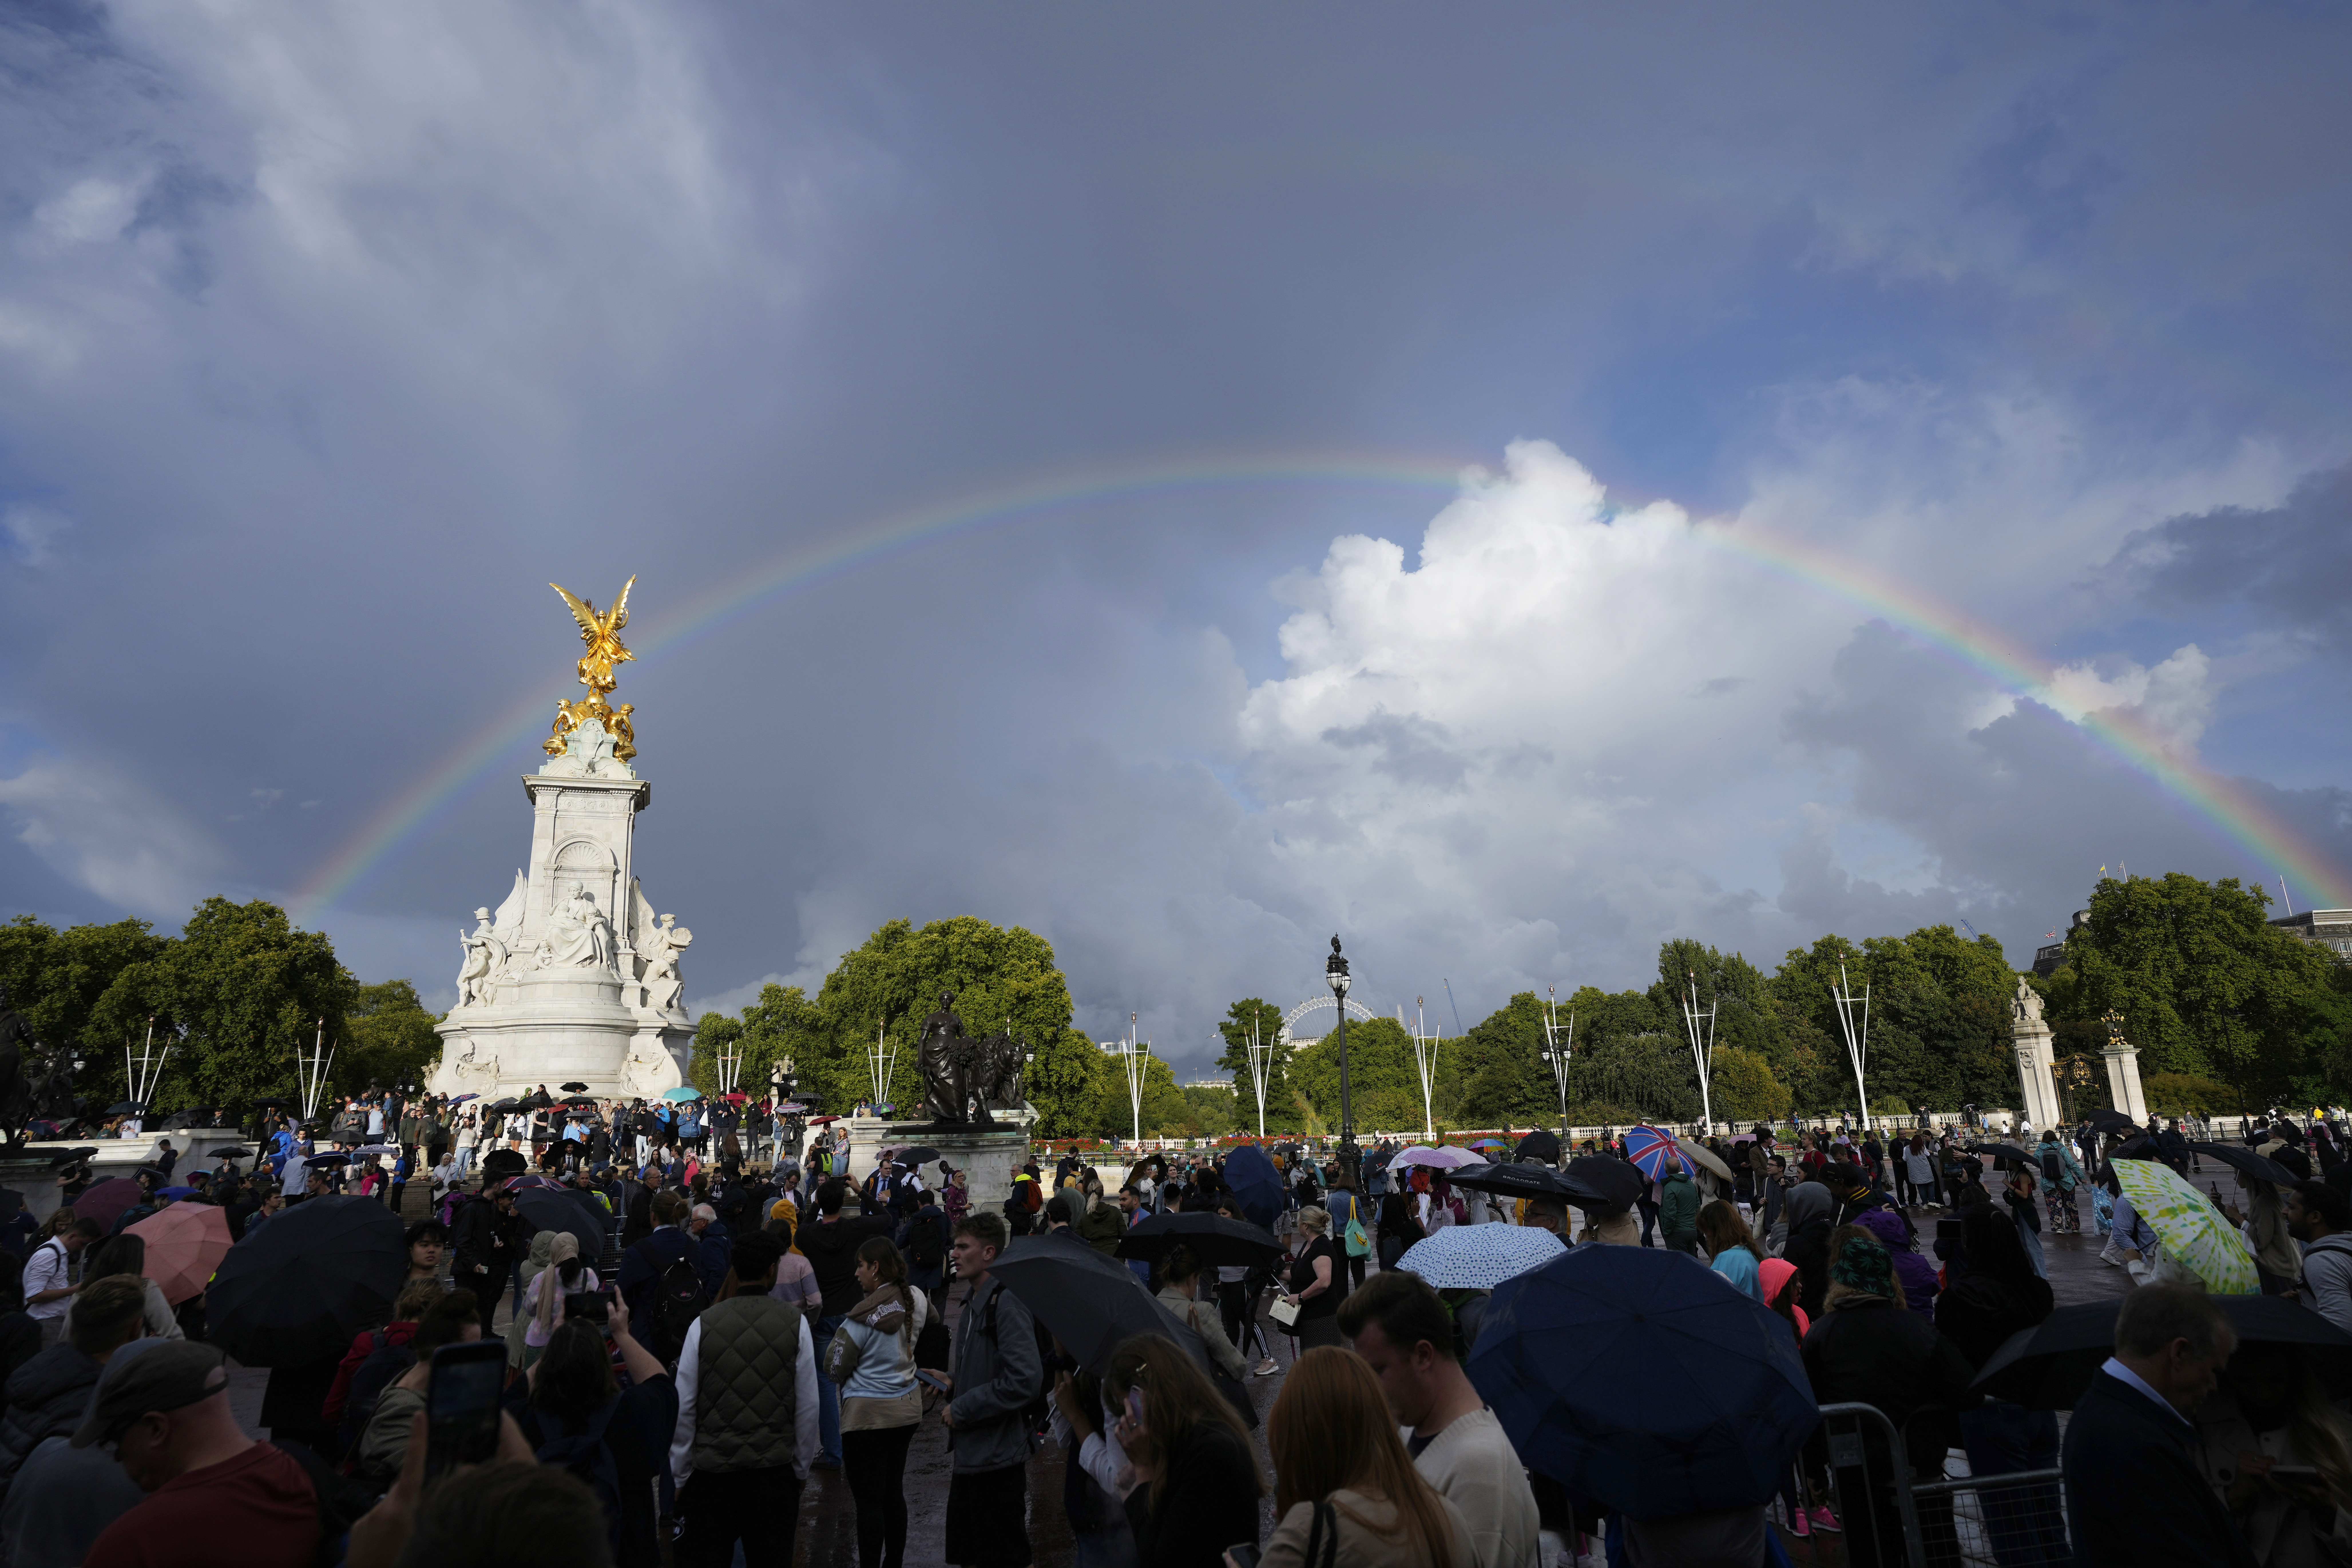 Shortly before the announcement of Queen Elizabeth II's death, people gather outside Buckingham Palace in London as a double rainbow appears in the sky, Thursday, Sept. 8, 2022. (AP Photo/Frank Augstein)